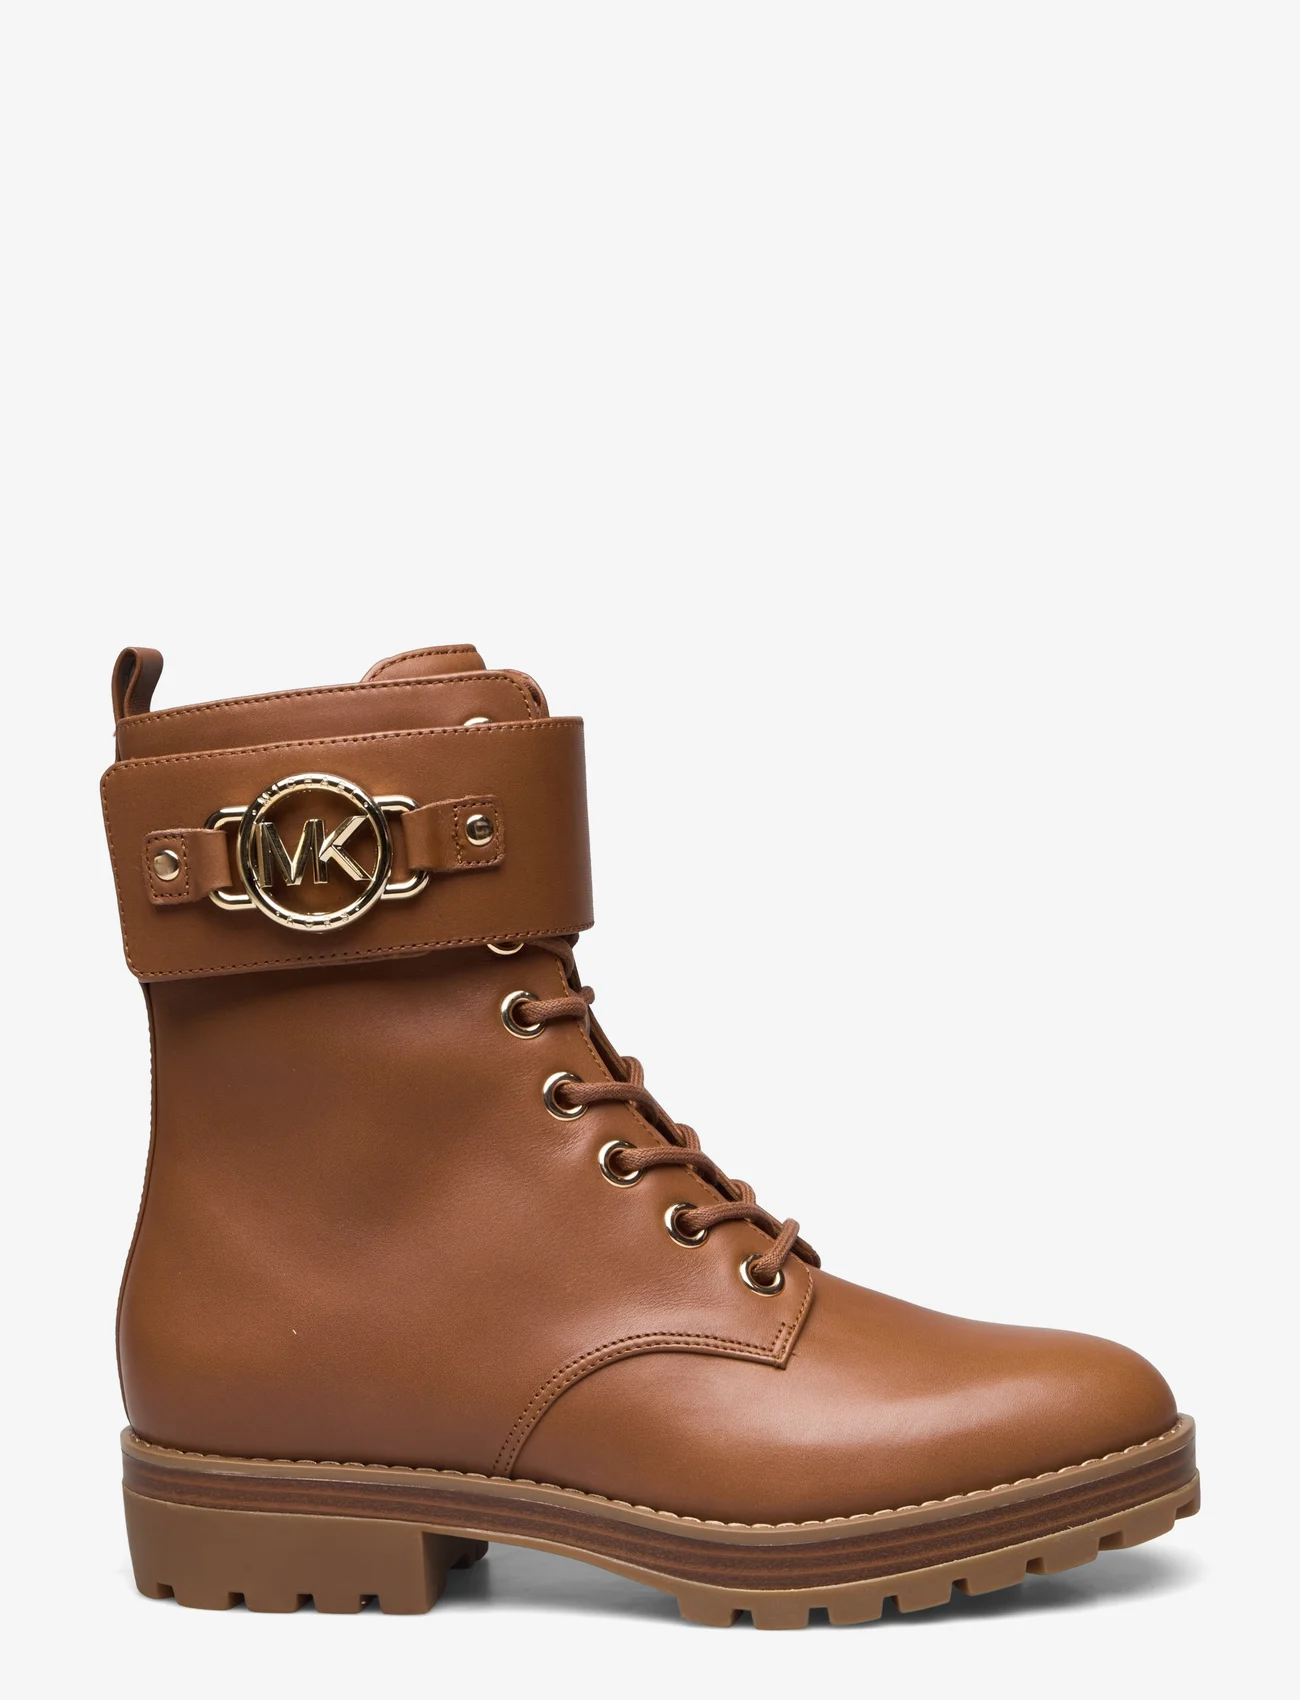 Michael Kors - RORY LACE UP BOOTIE - geschnürte stiefel - luggage - 1